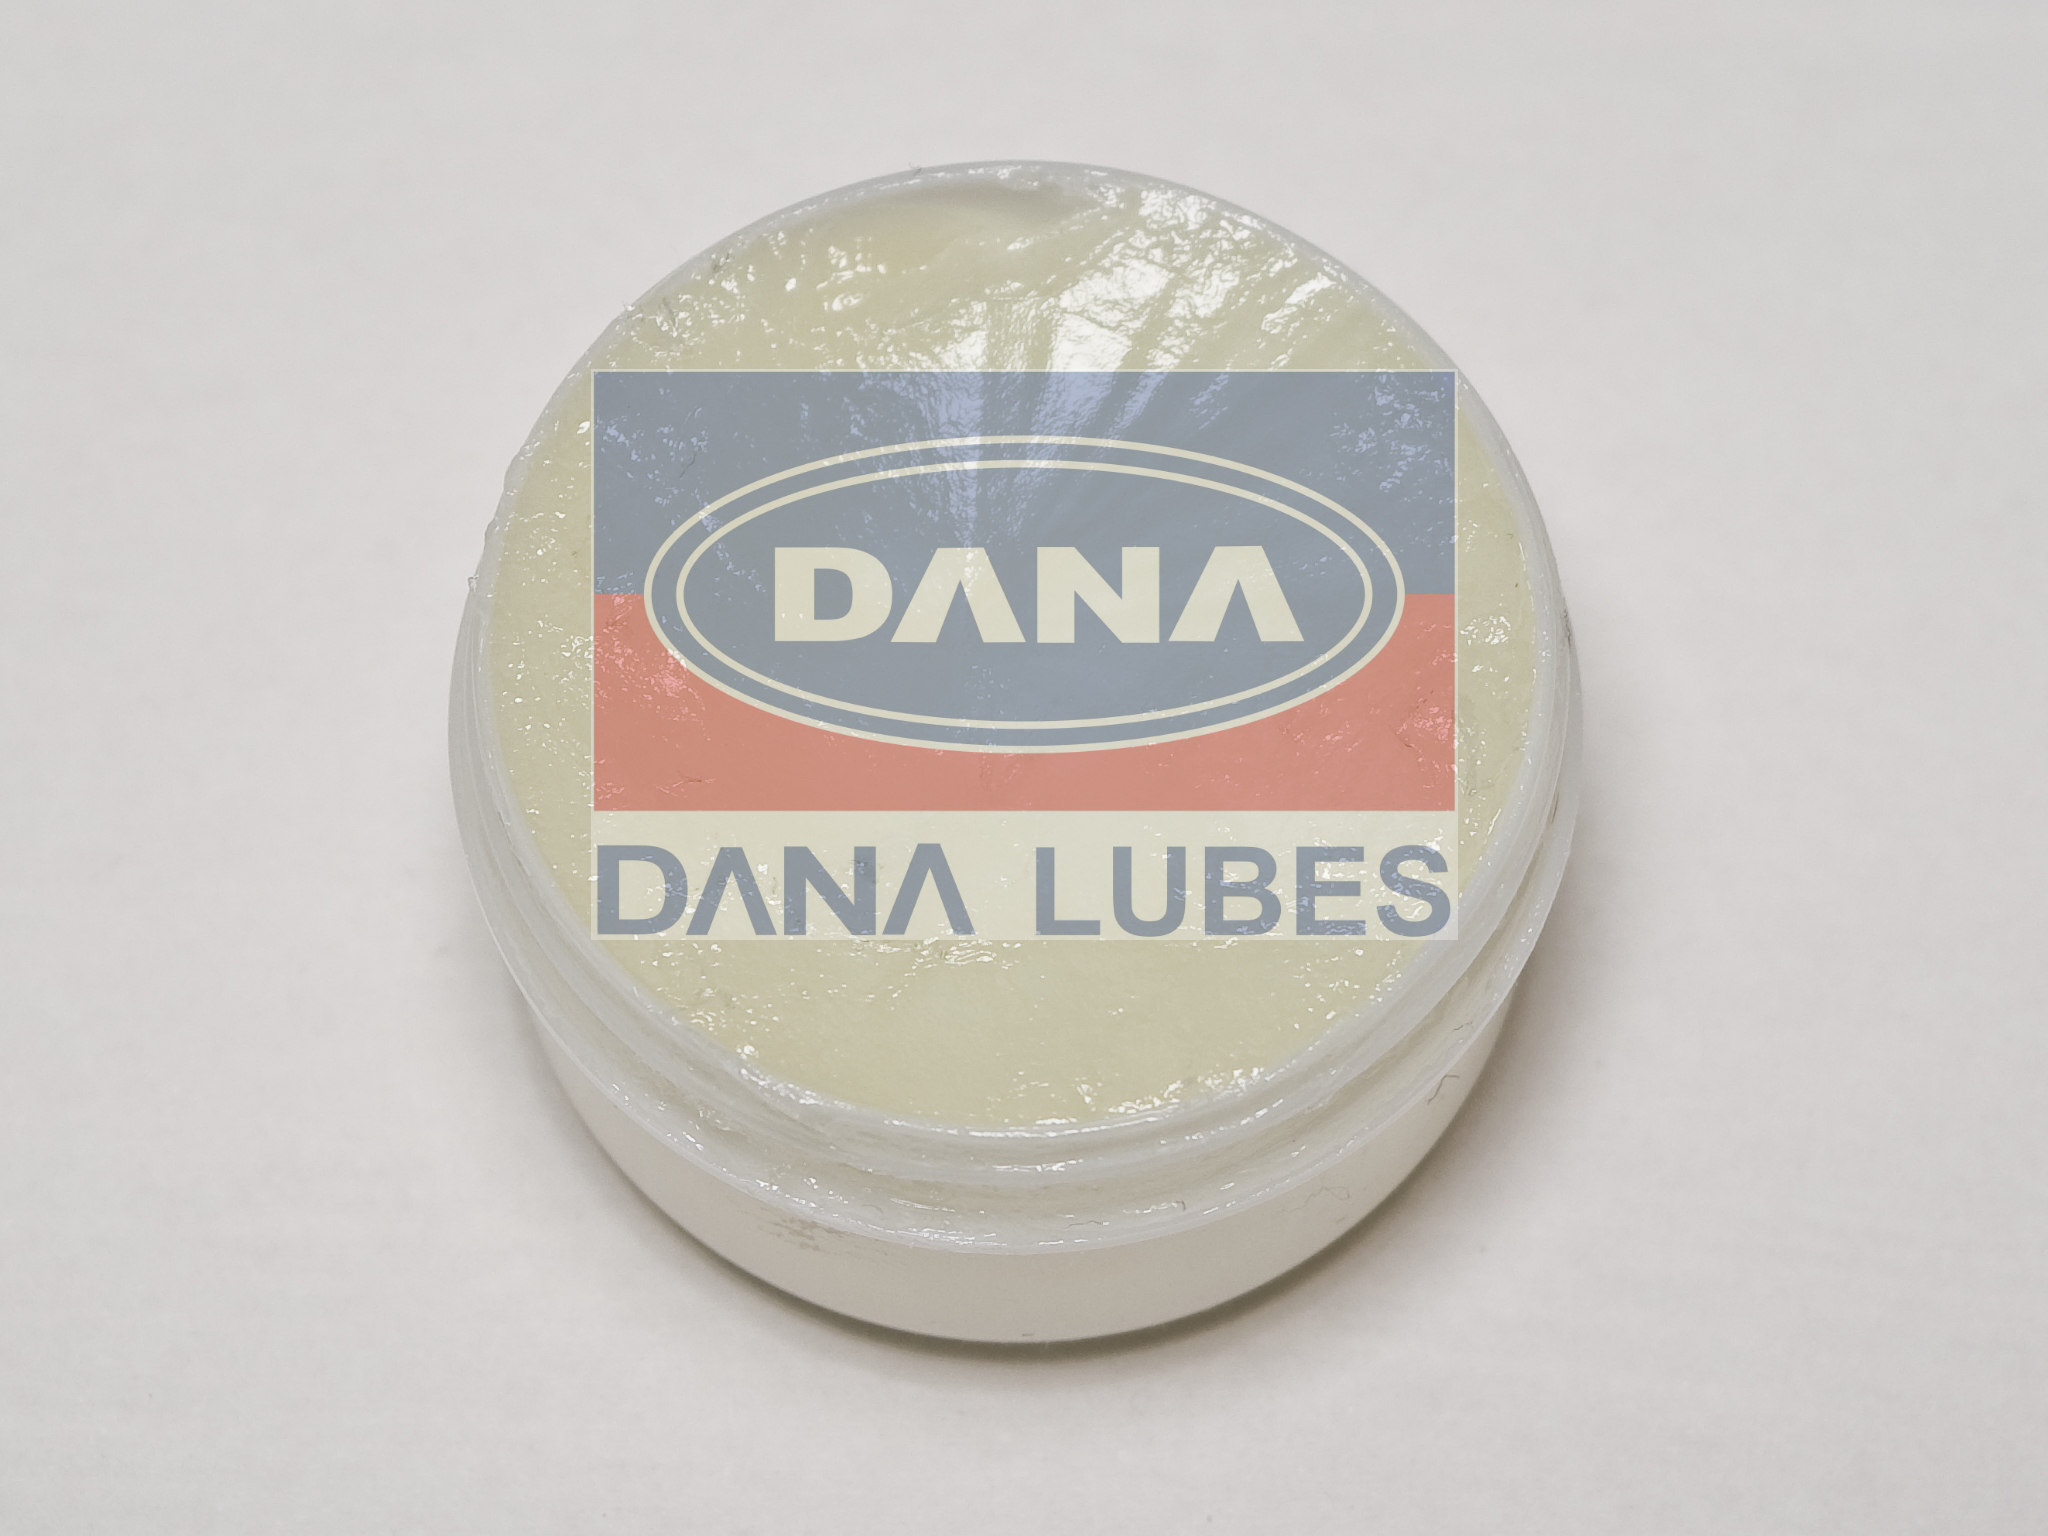 DANA Vaseline jelly comes in number of packing options